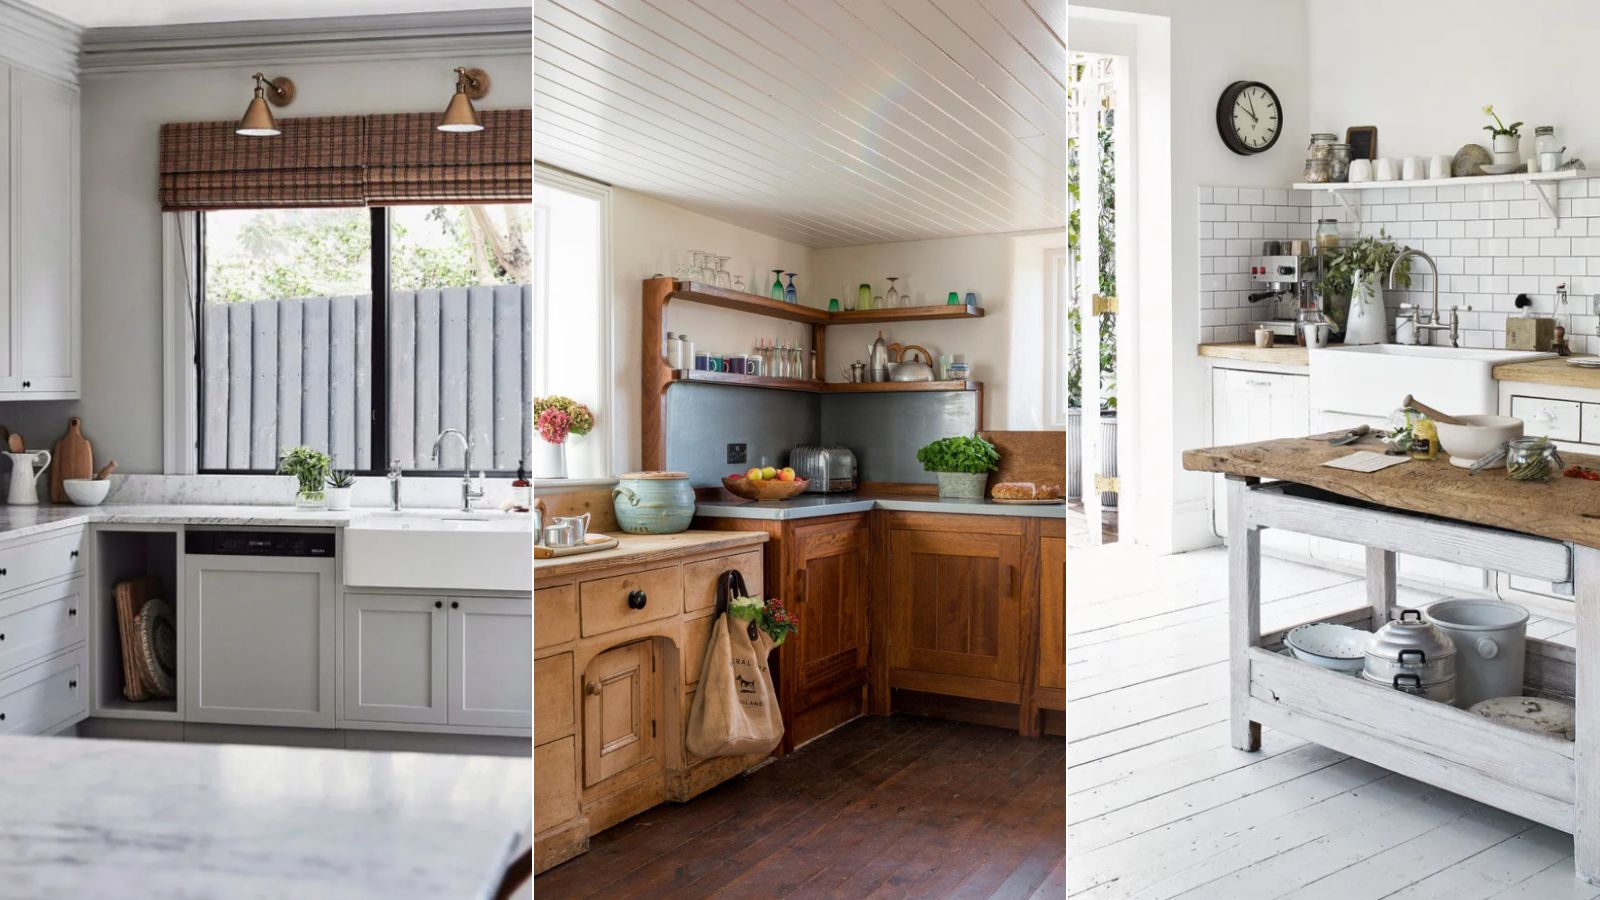 5 modern rustic kitchen design mistakes (and how to avoid them)